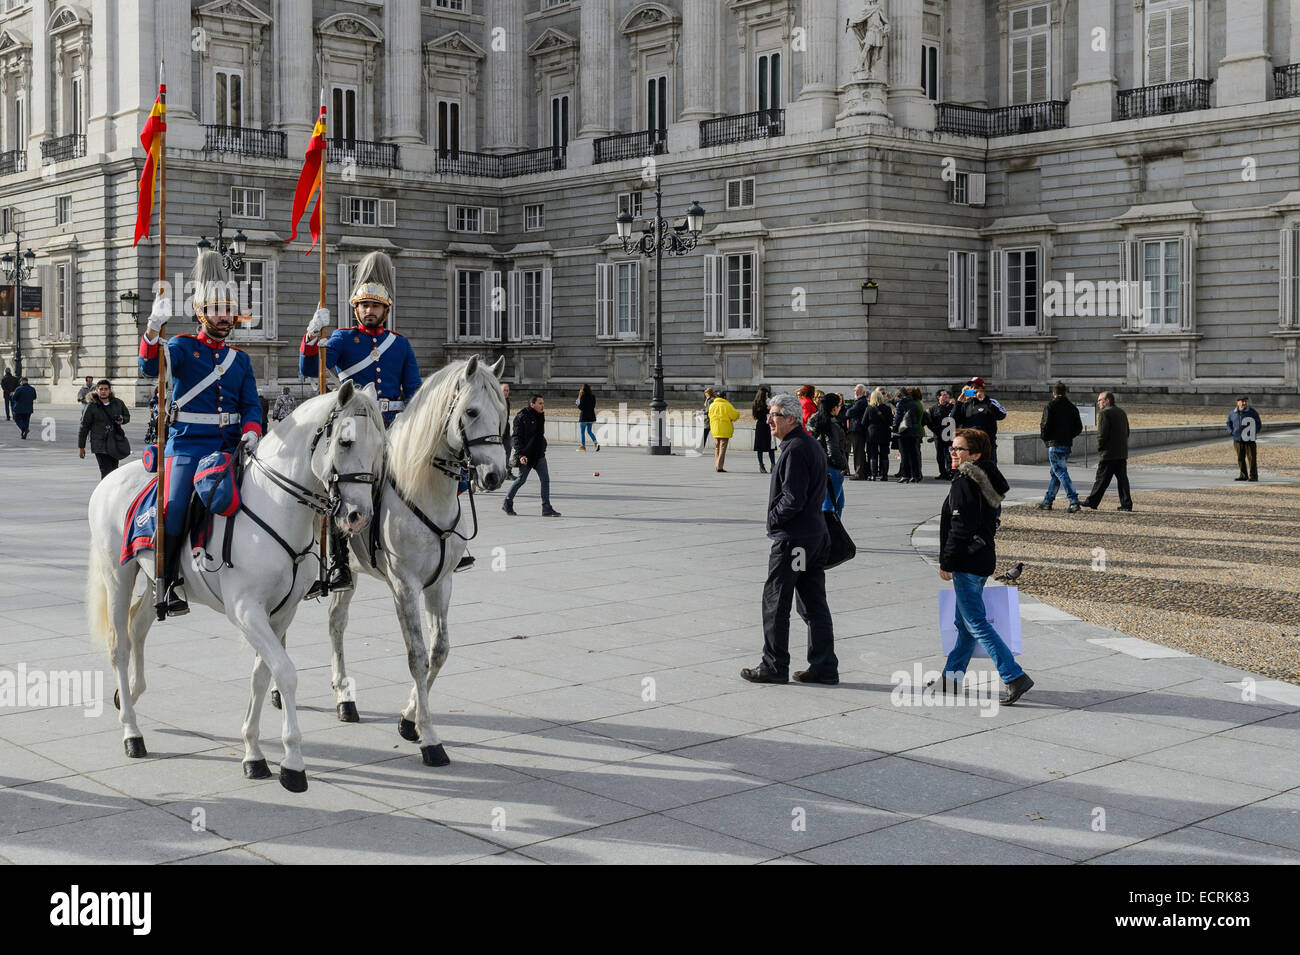 Royal Guards riding in front of the royal palace Stock Photo